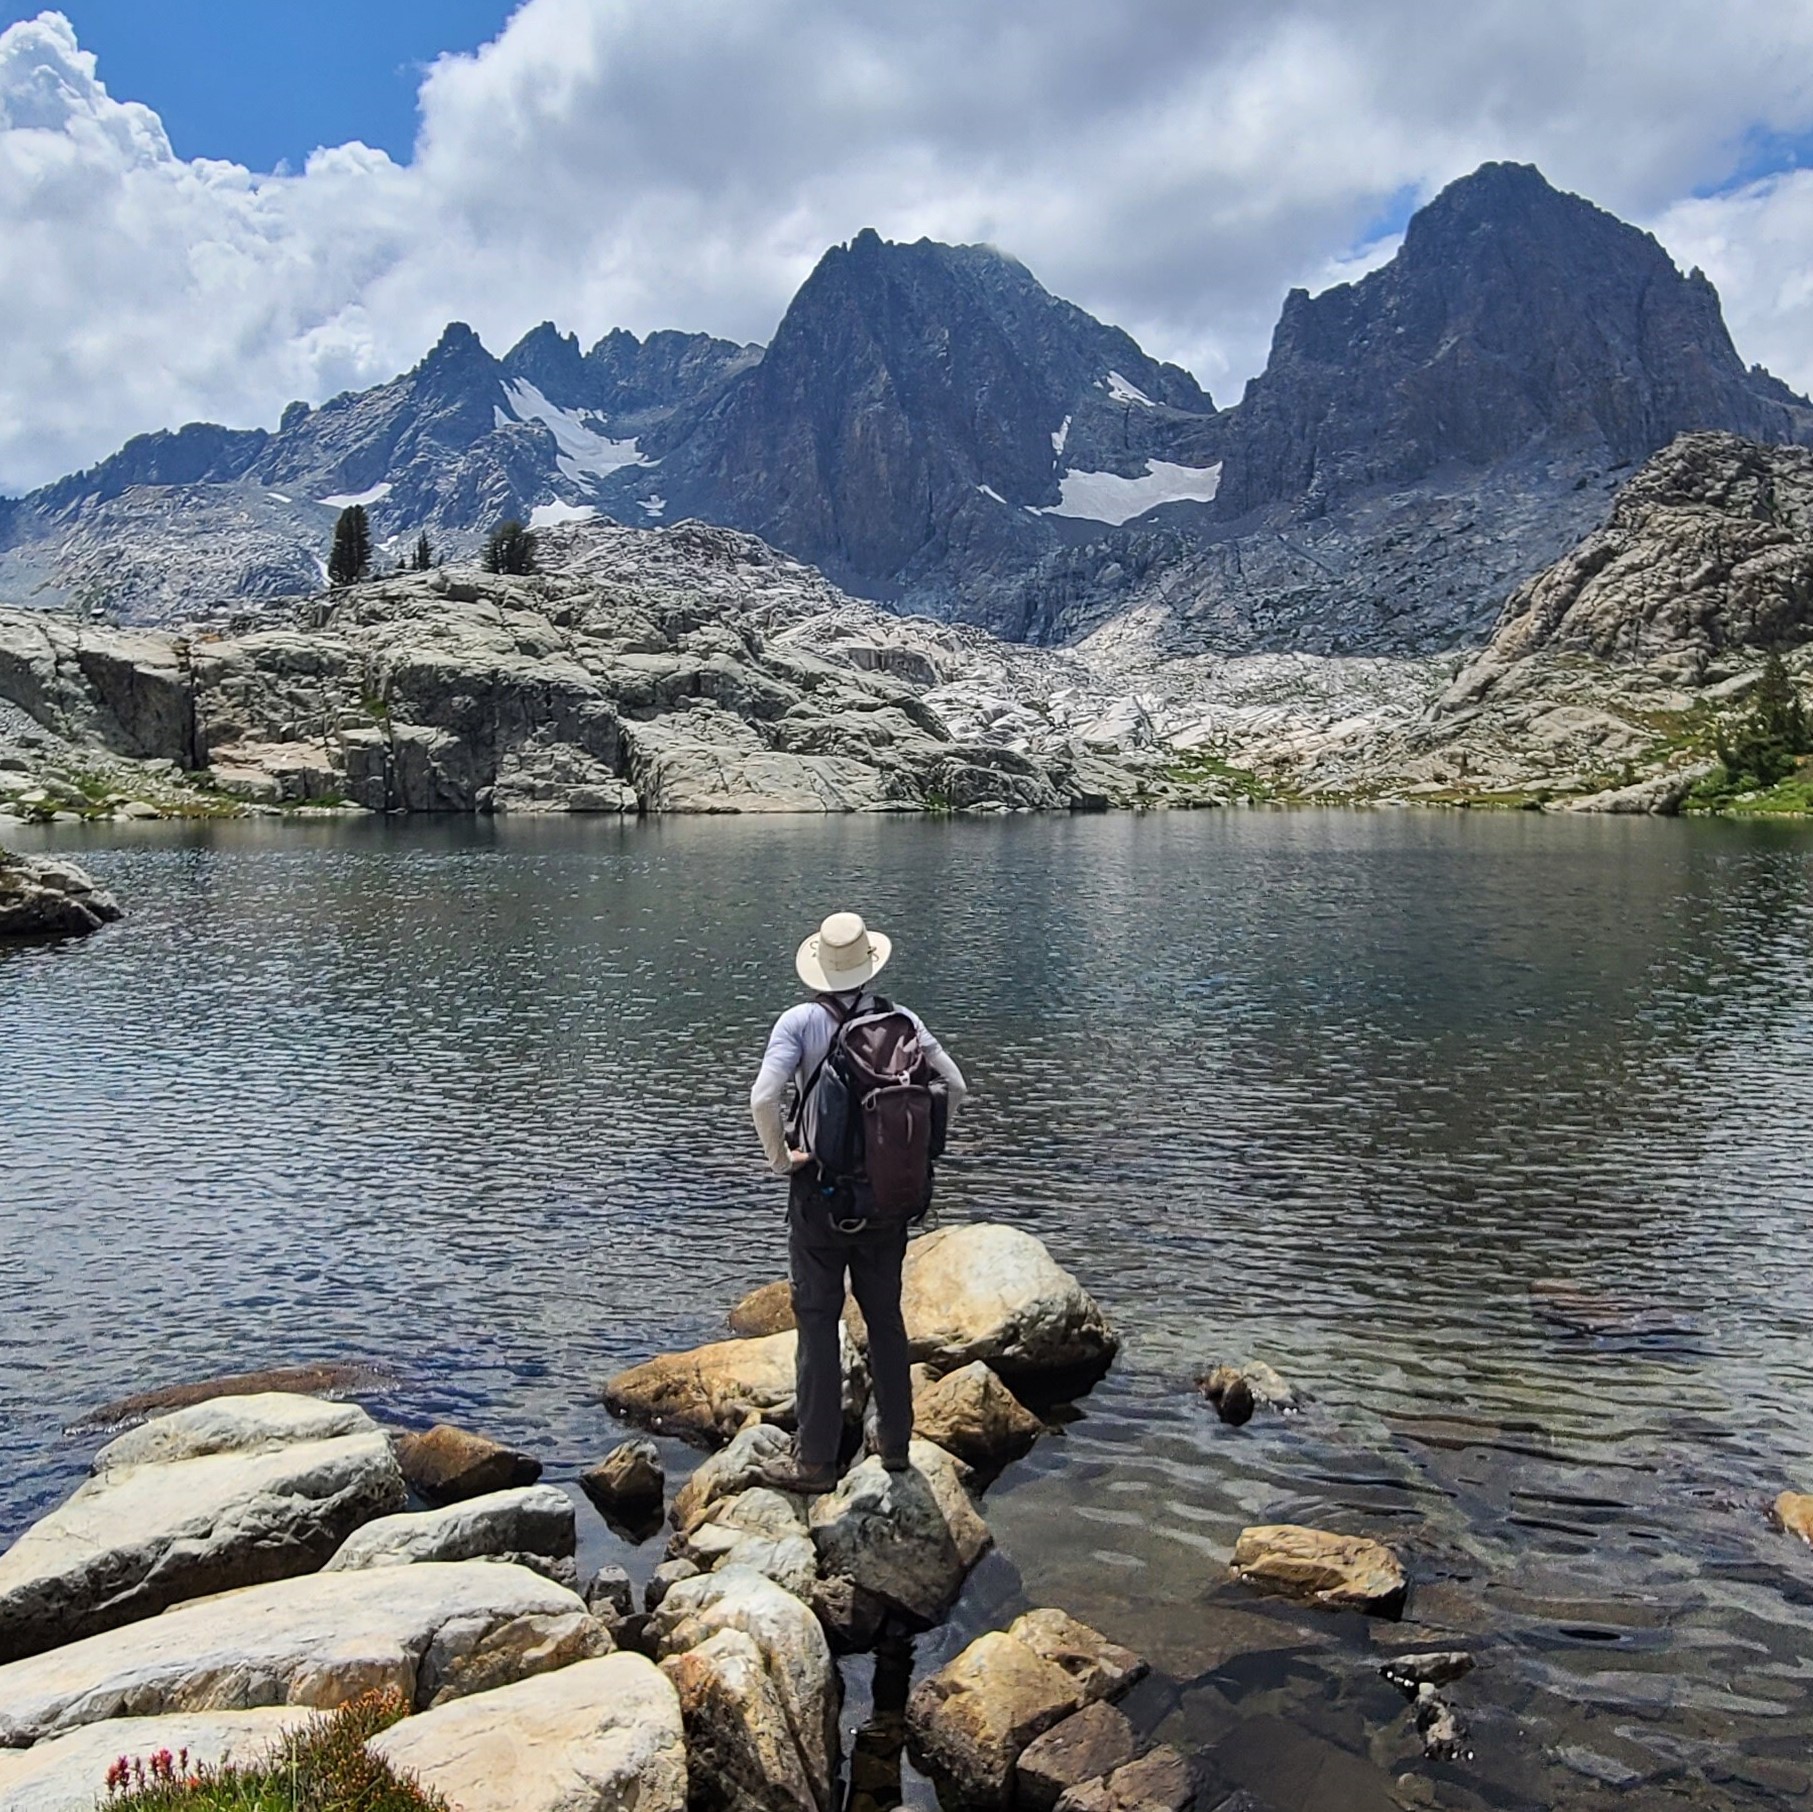 An adventurous man standing on rocks near a lake with mountains in the background, embracing the breathtaking setting of nature.